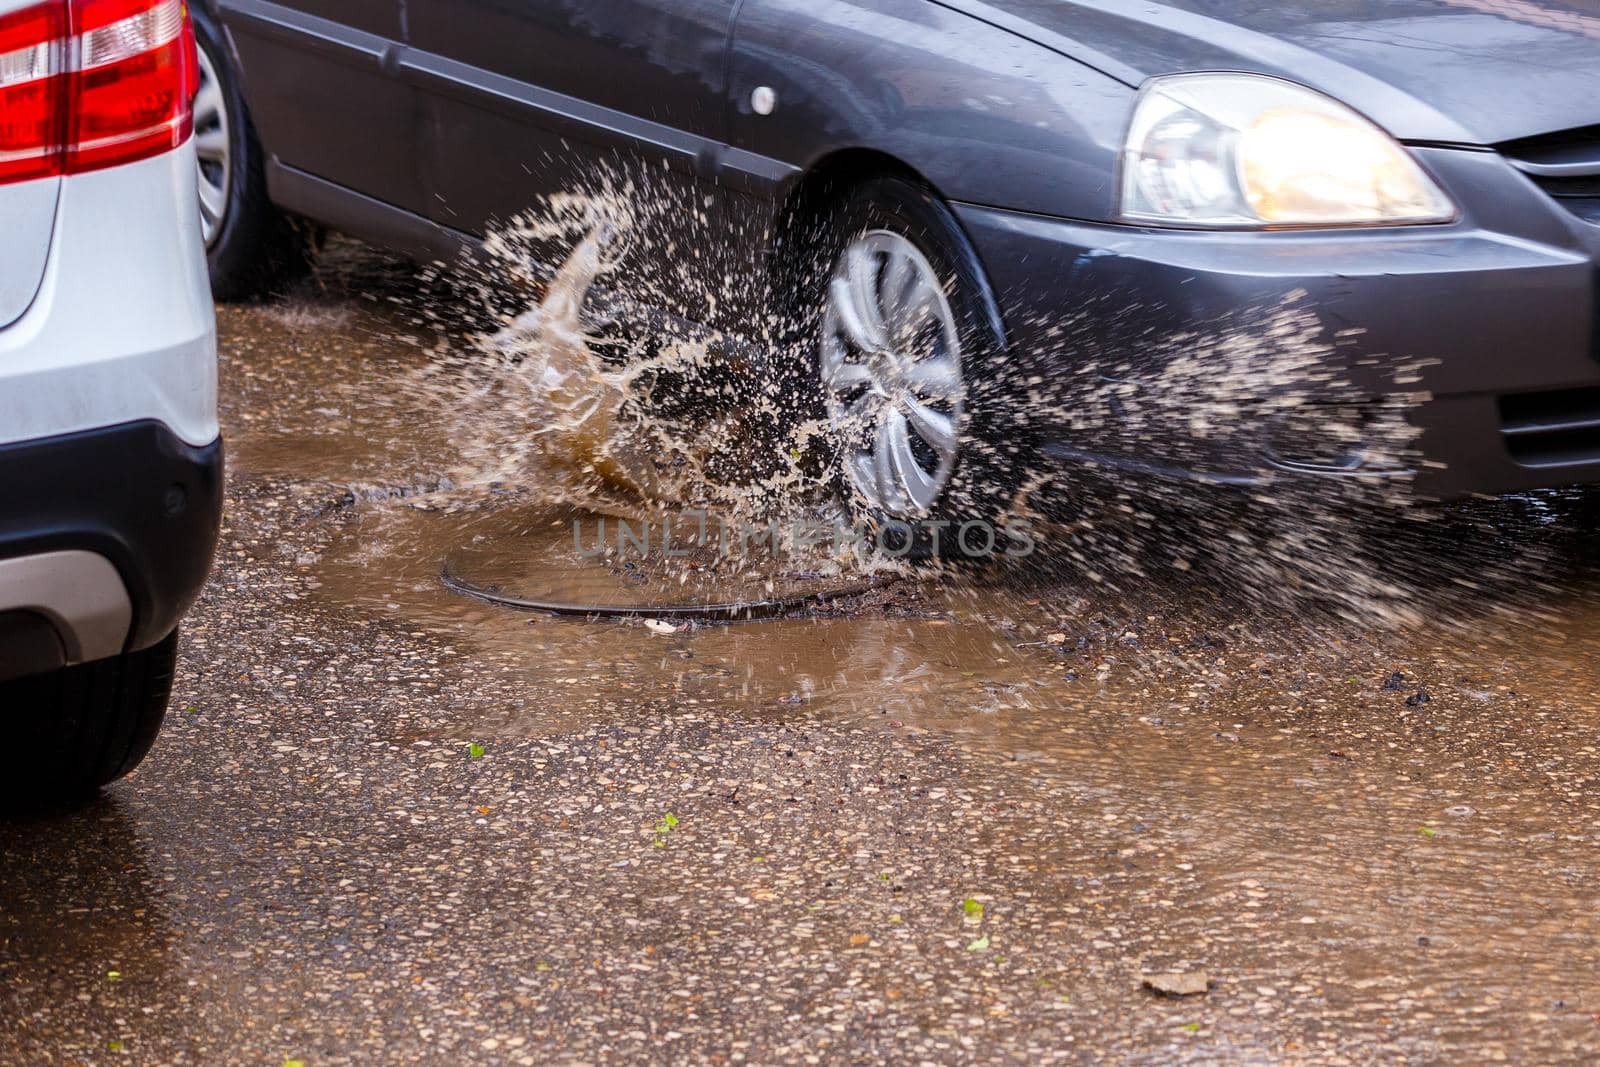 water splashes from car wheel passing summer puddle around manhole cover by z1b